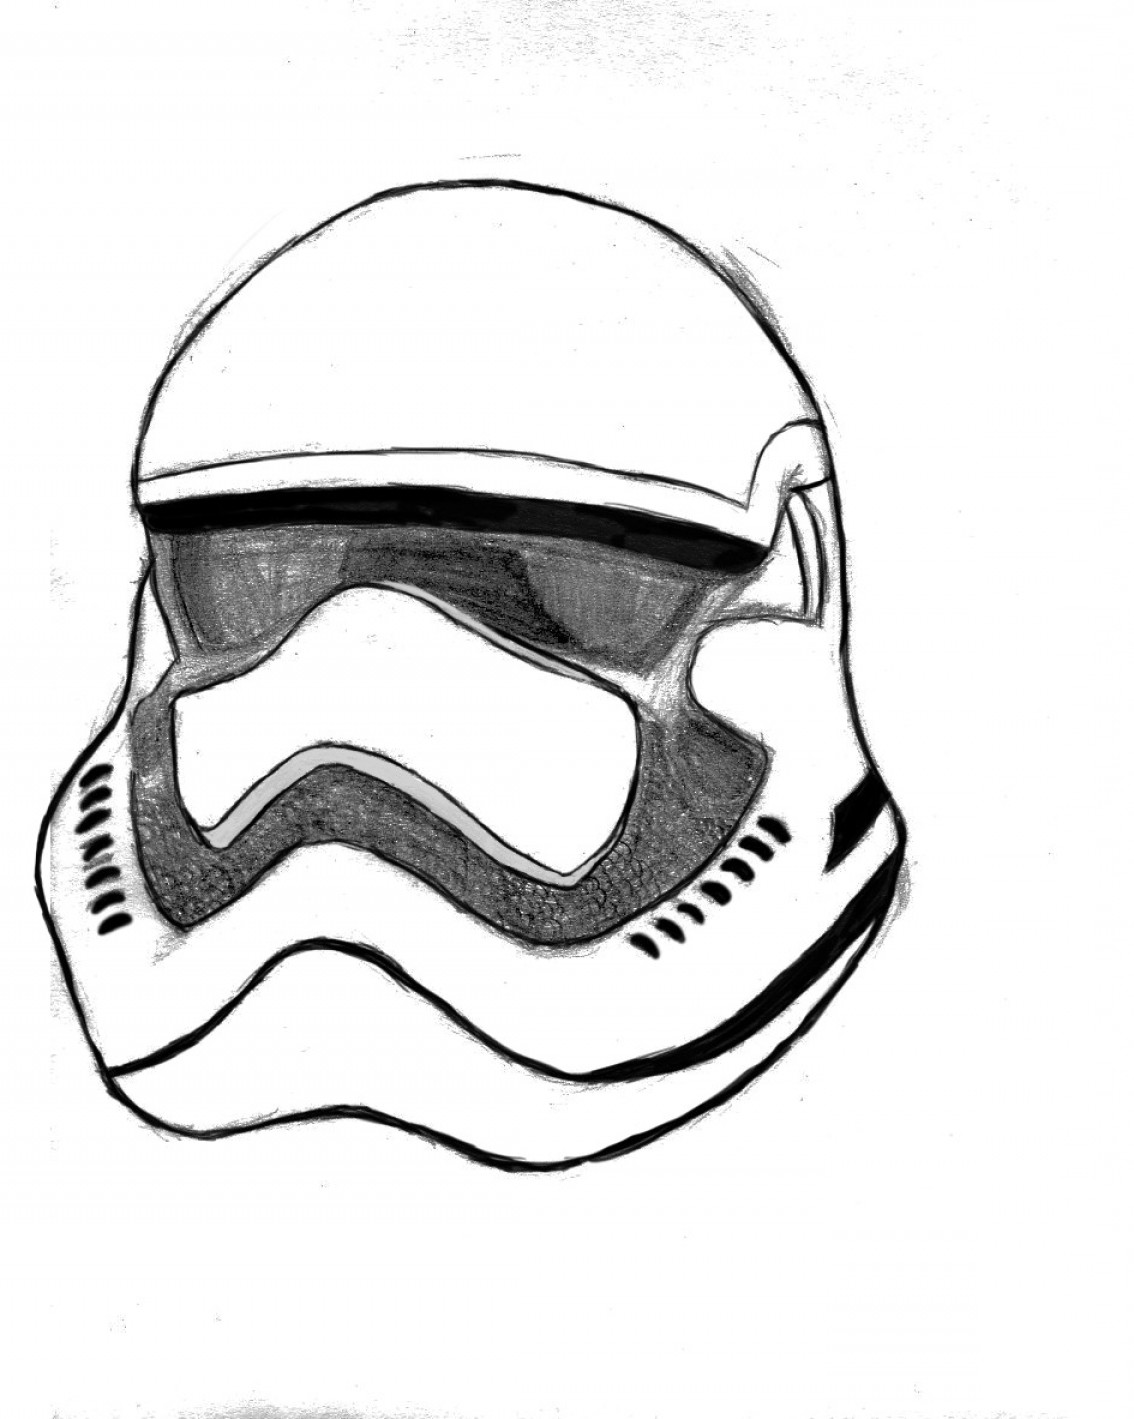 Stormtrooper Helmet Sketch at PaintingValley.com | Explore collection